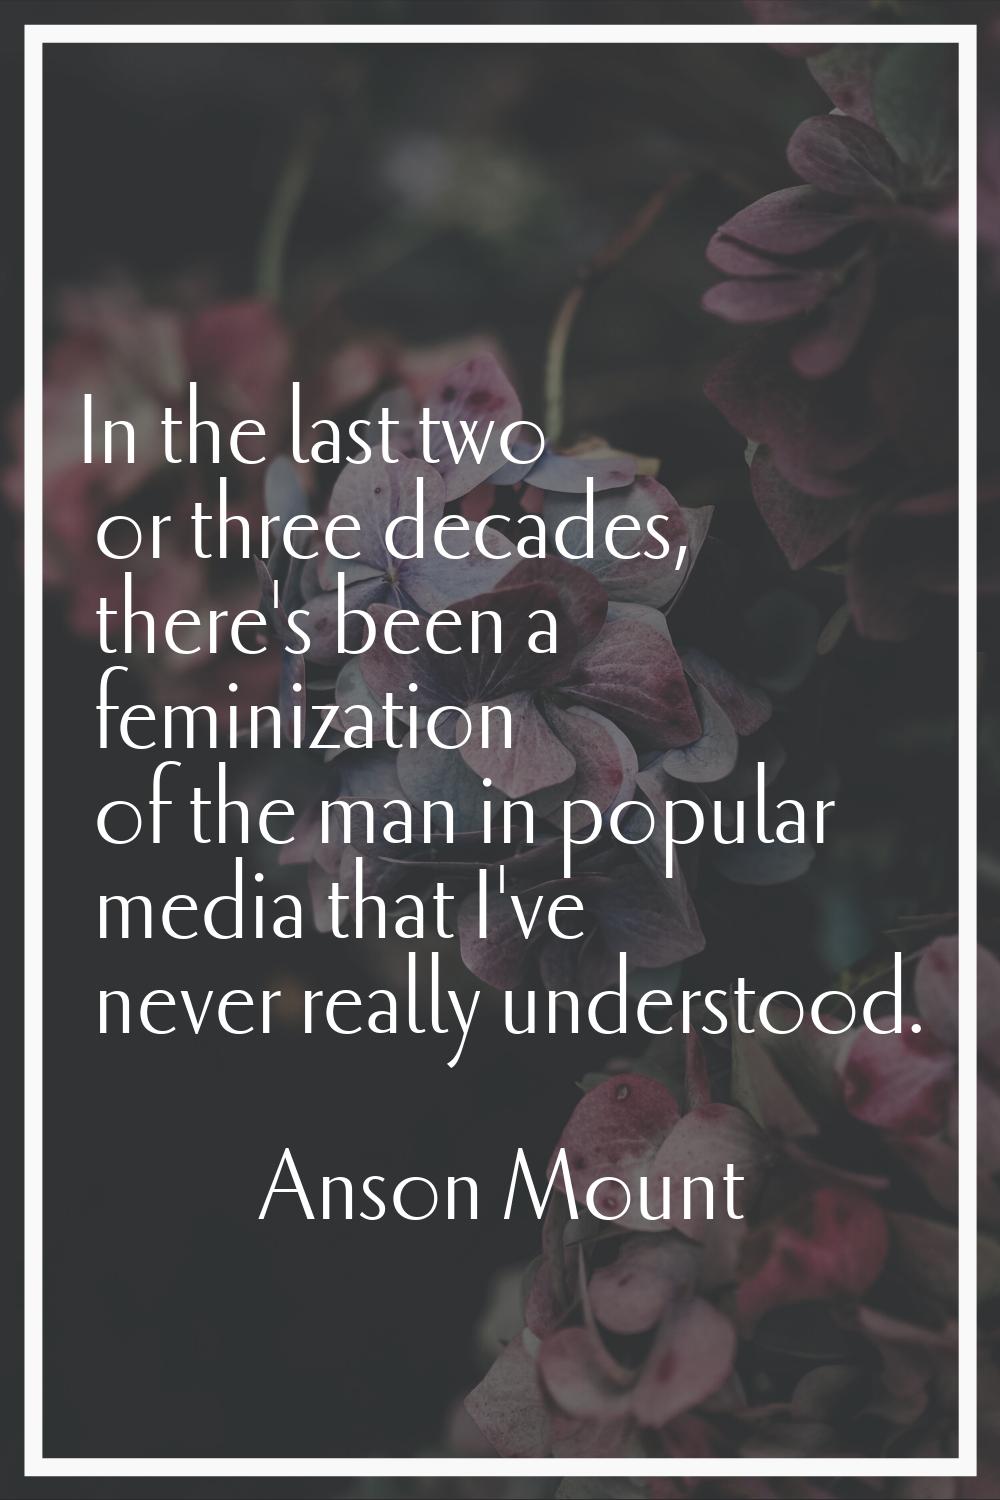 In the last two or three decades, there's been a feminization of the man in popular media that I've